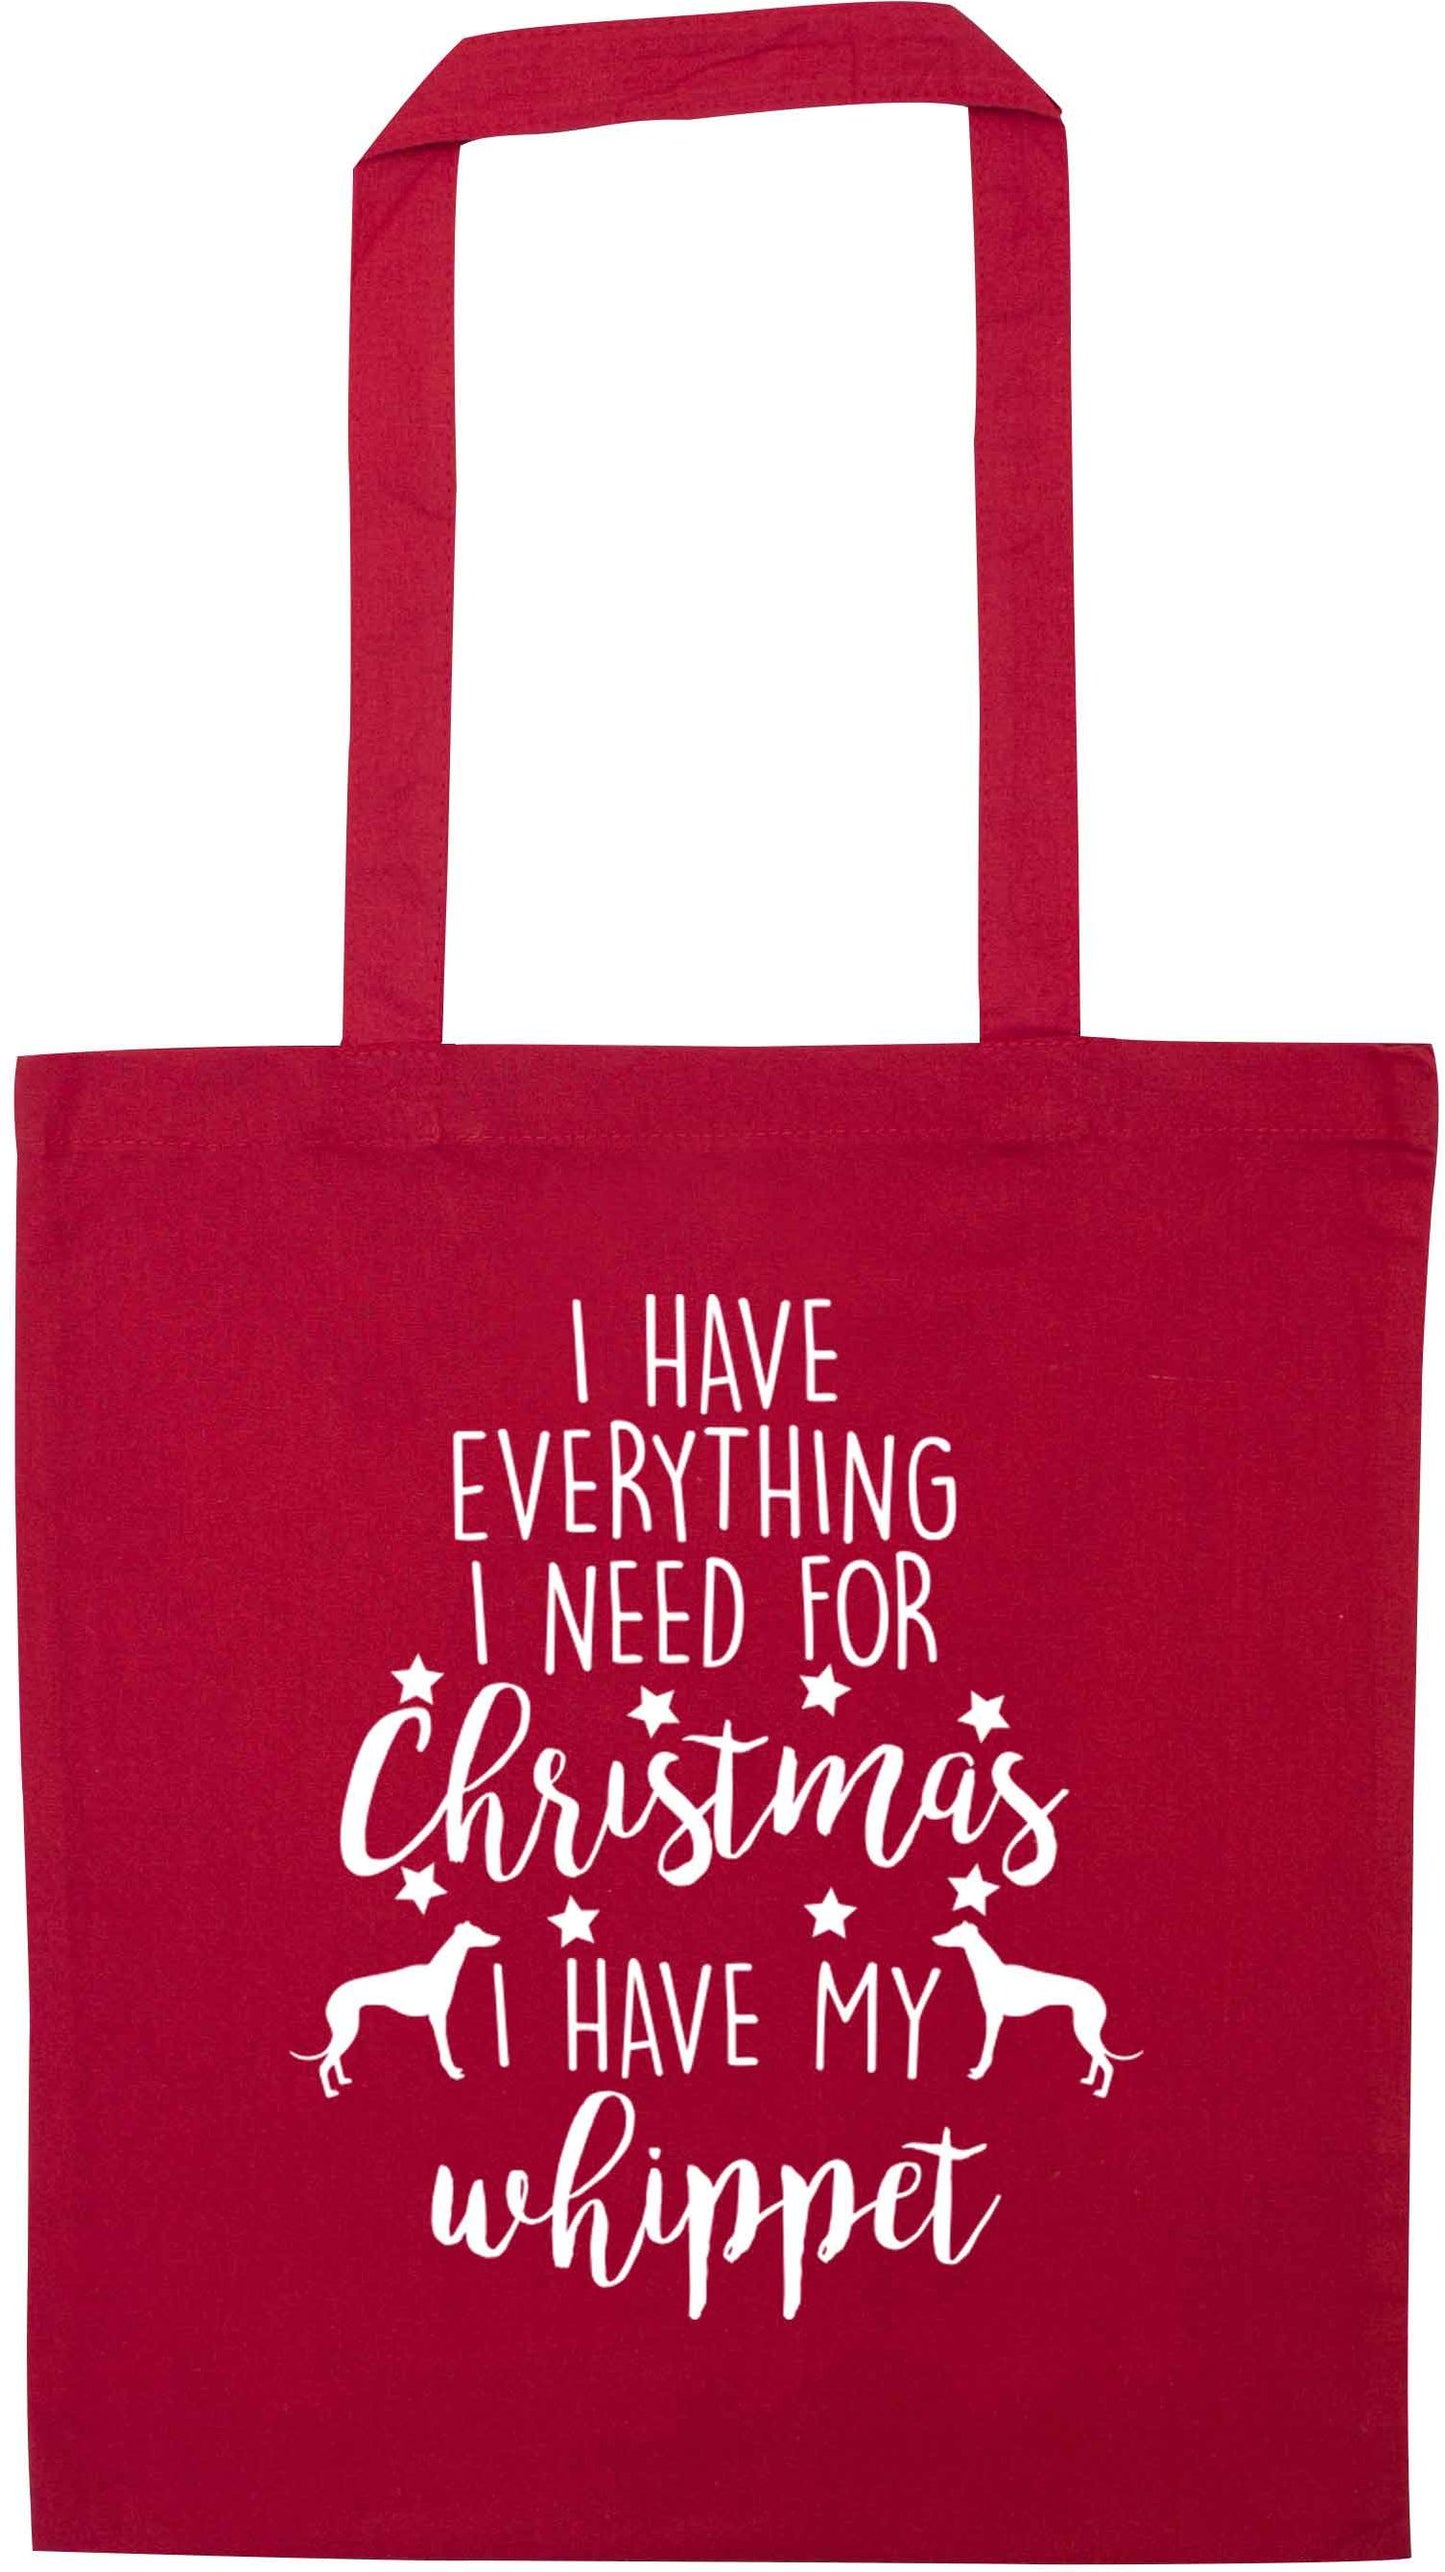 I have everything I need for Christmas I have my whippet red tote bag